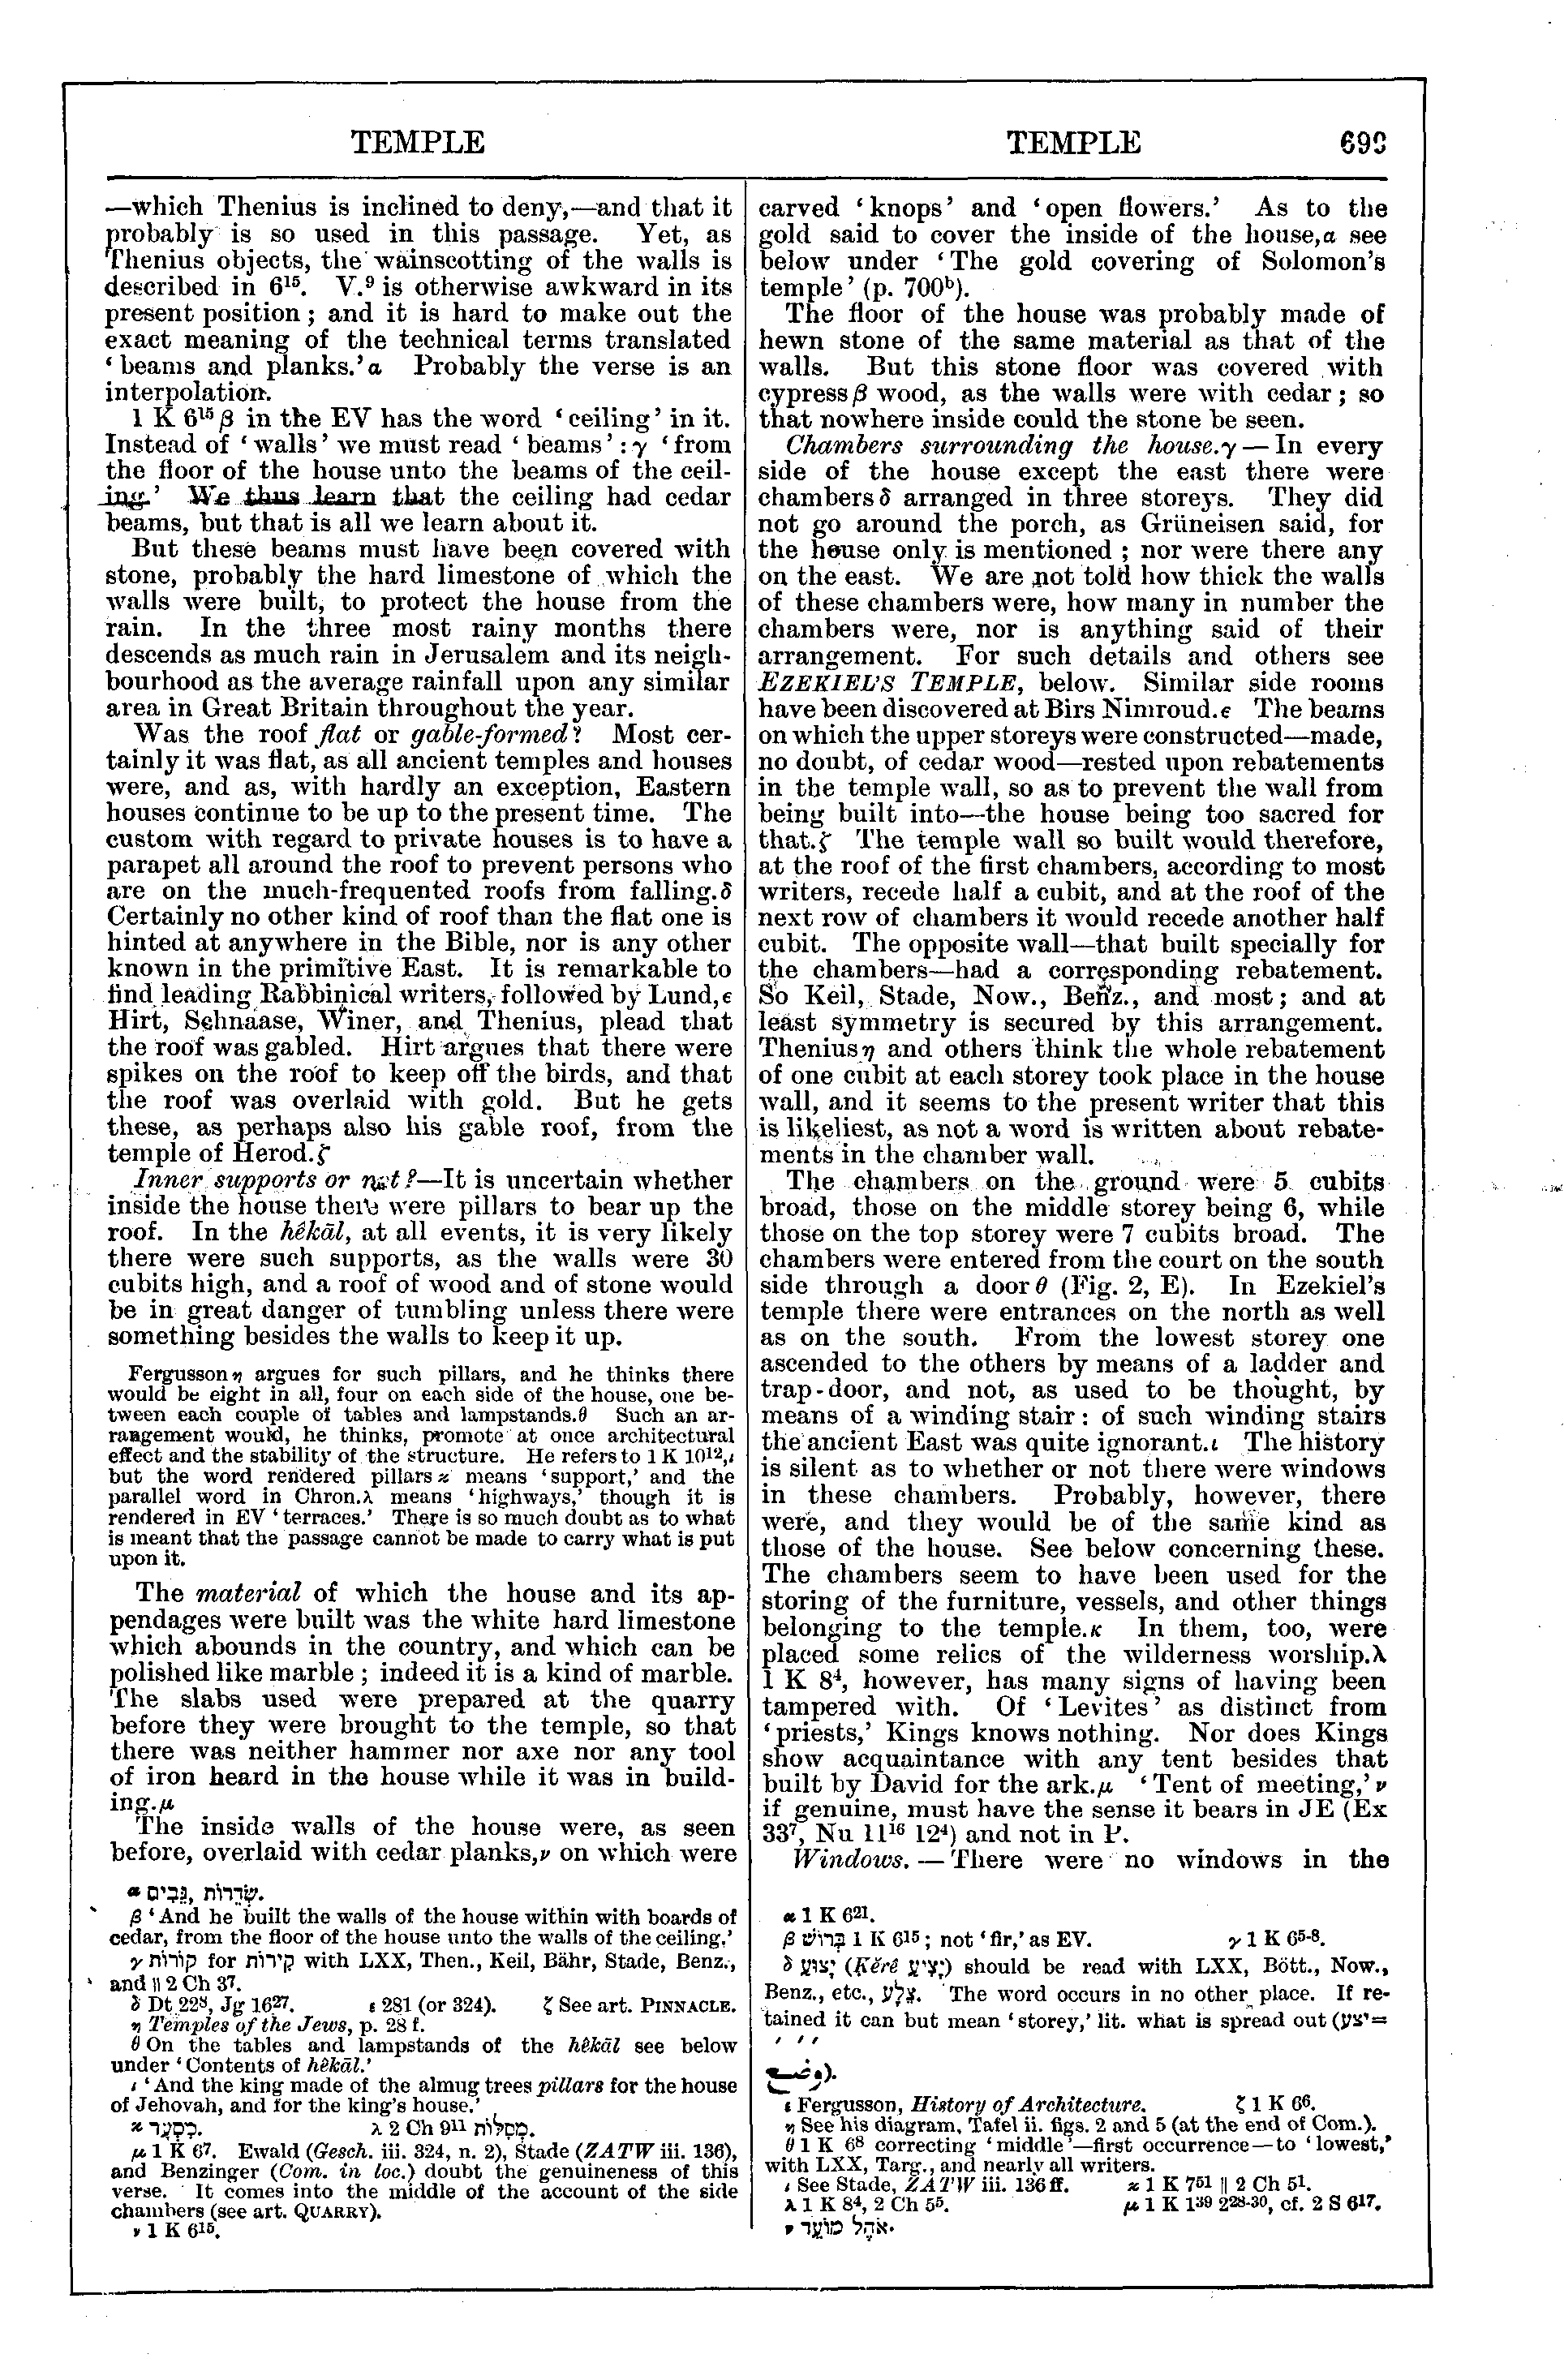 Image of page 699